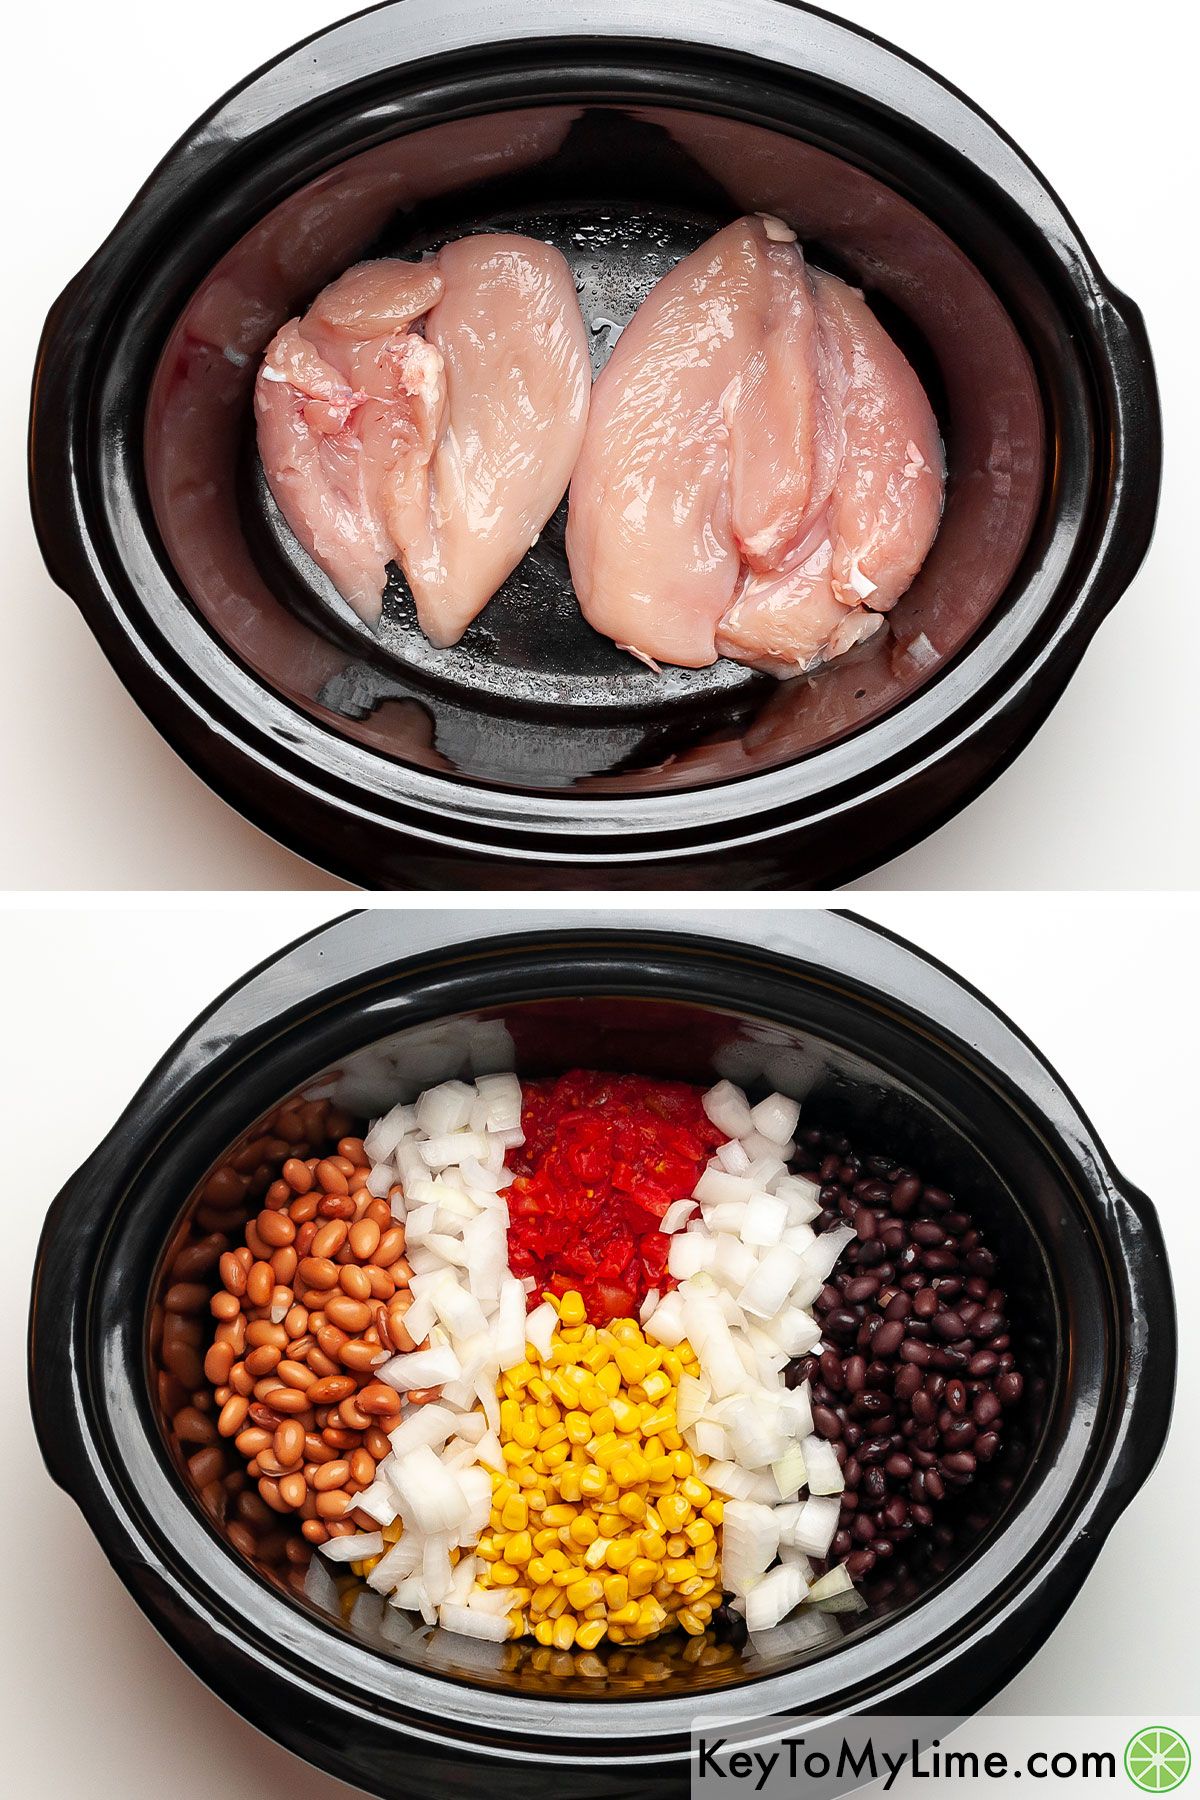 A process collage showing the addition of chicken, beans, onions, corn, and RO-TEL to a slow cooker.